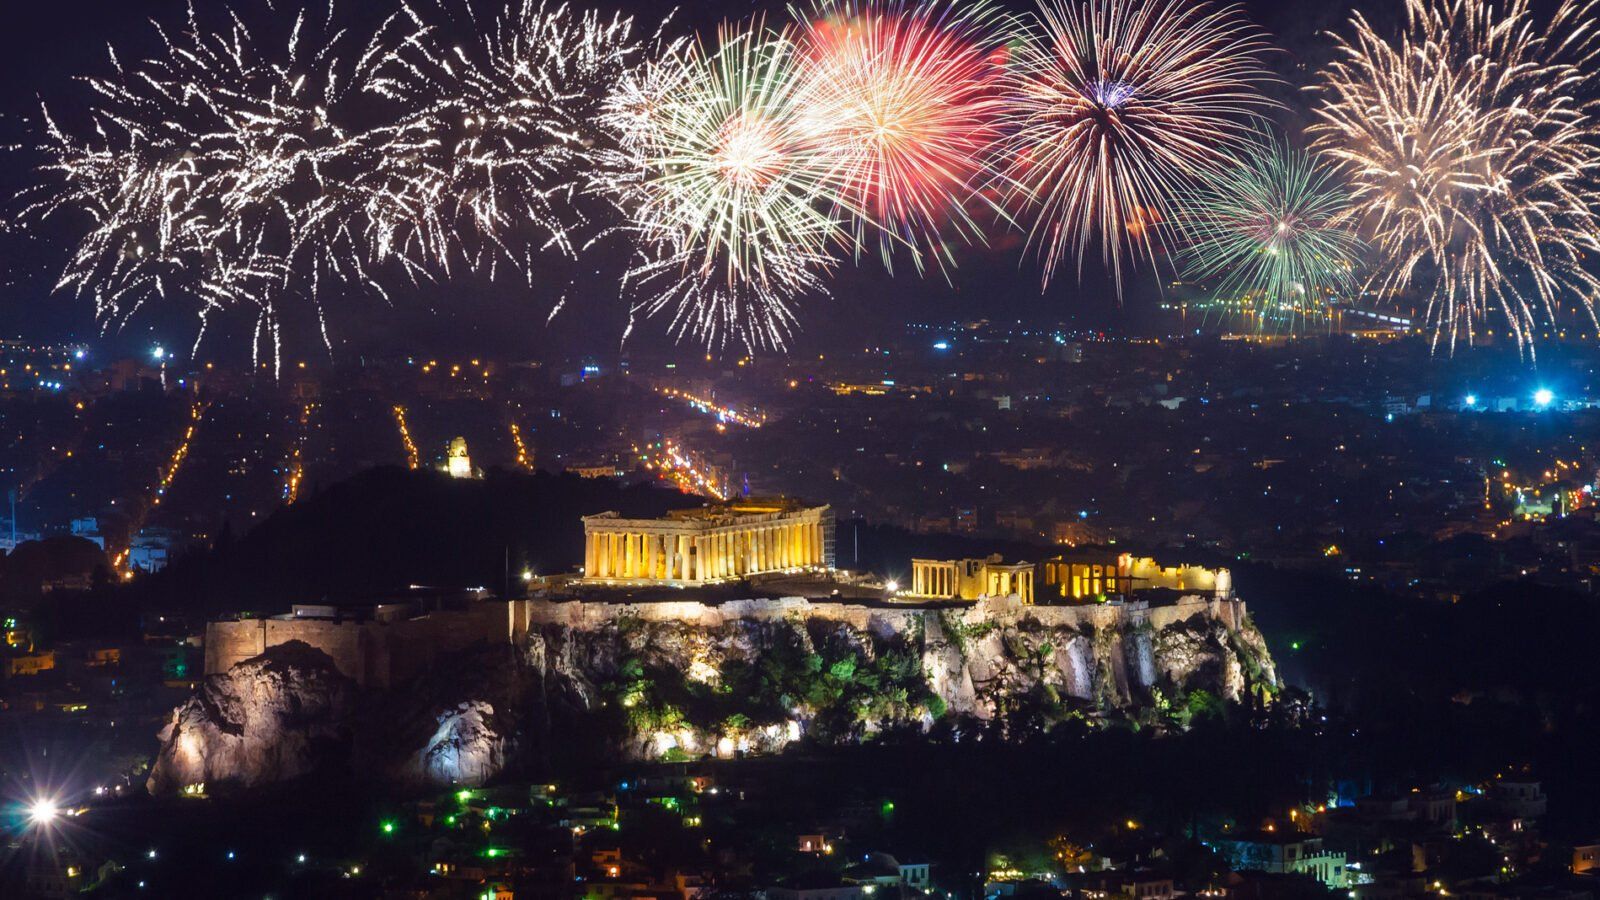 fireworks illuminate the night sky over the Acropolis in Athens, Greece